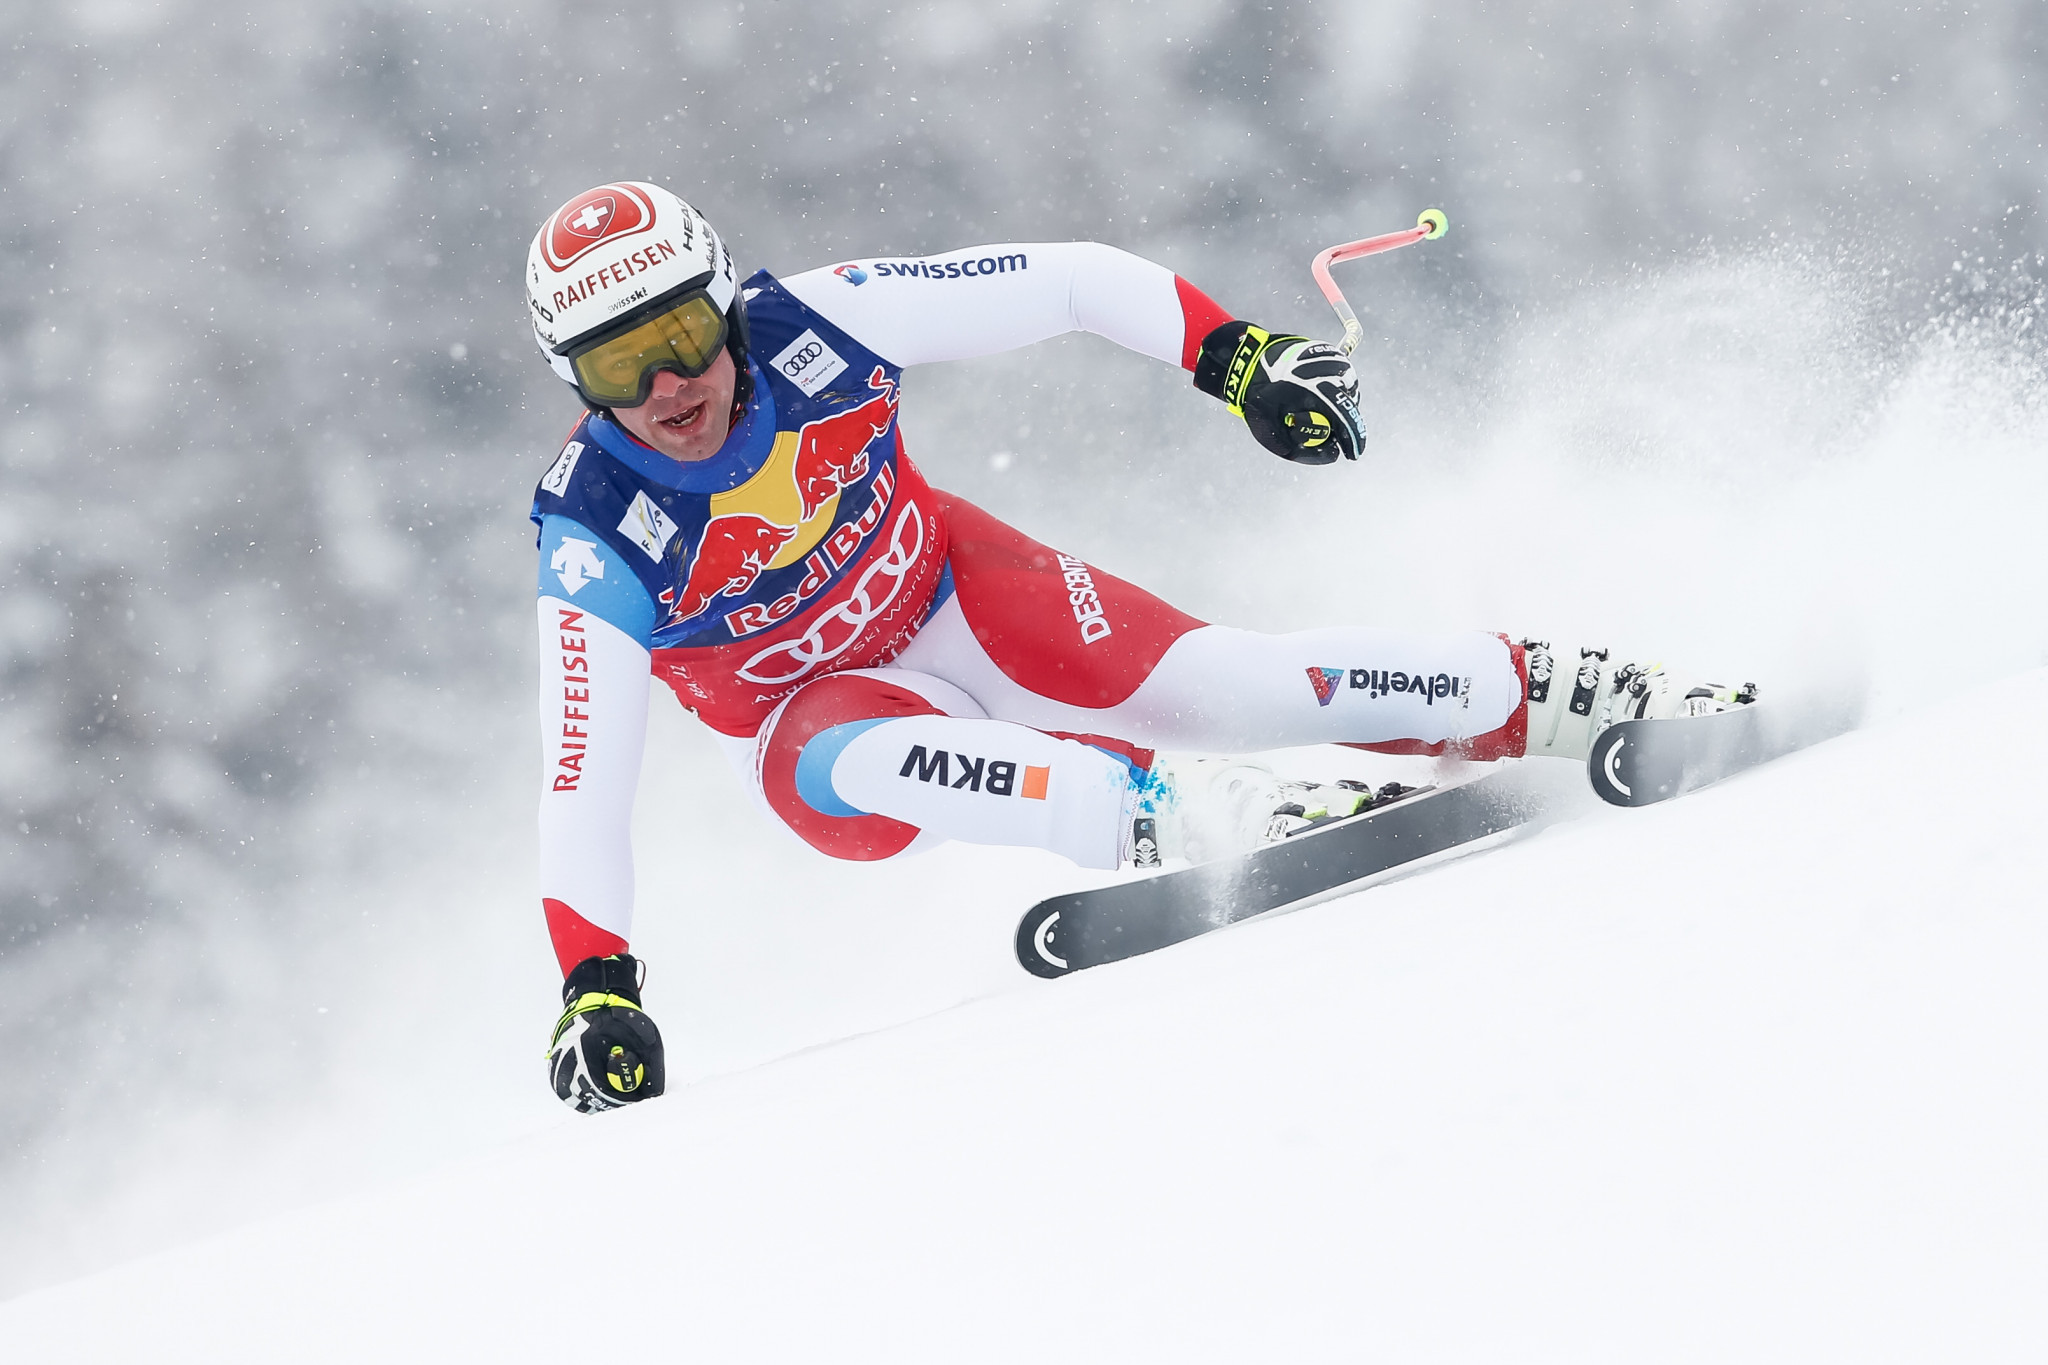 Switzerland's Beat Feuz, leader of the FIS Alpine Skiing World Cup standings in downhill, finished second today ©Getty Images